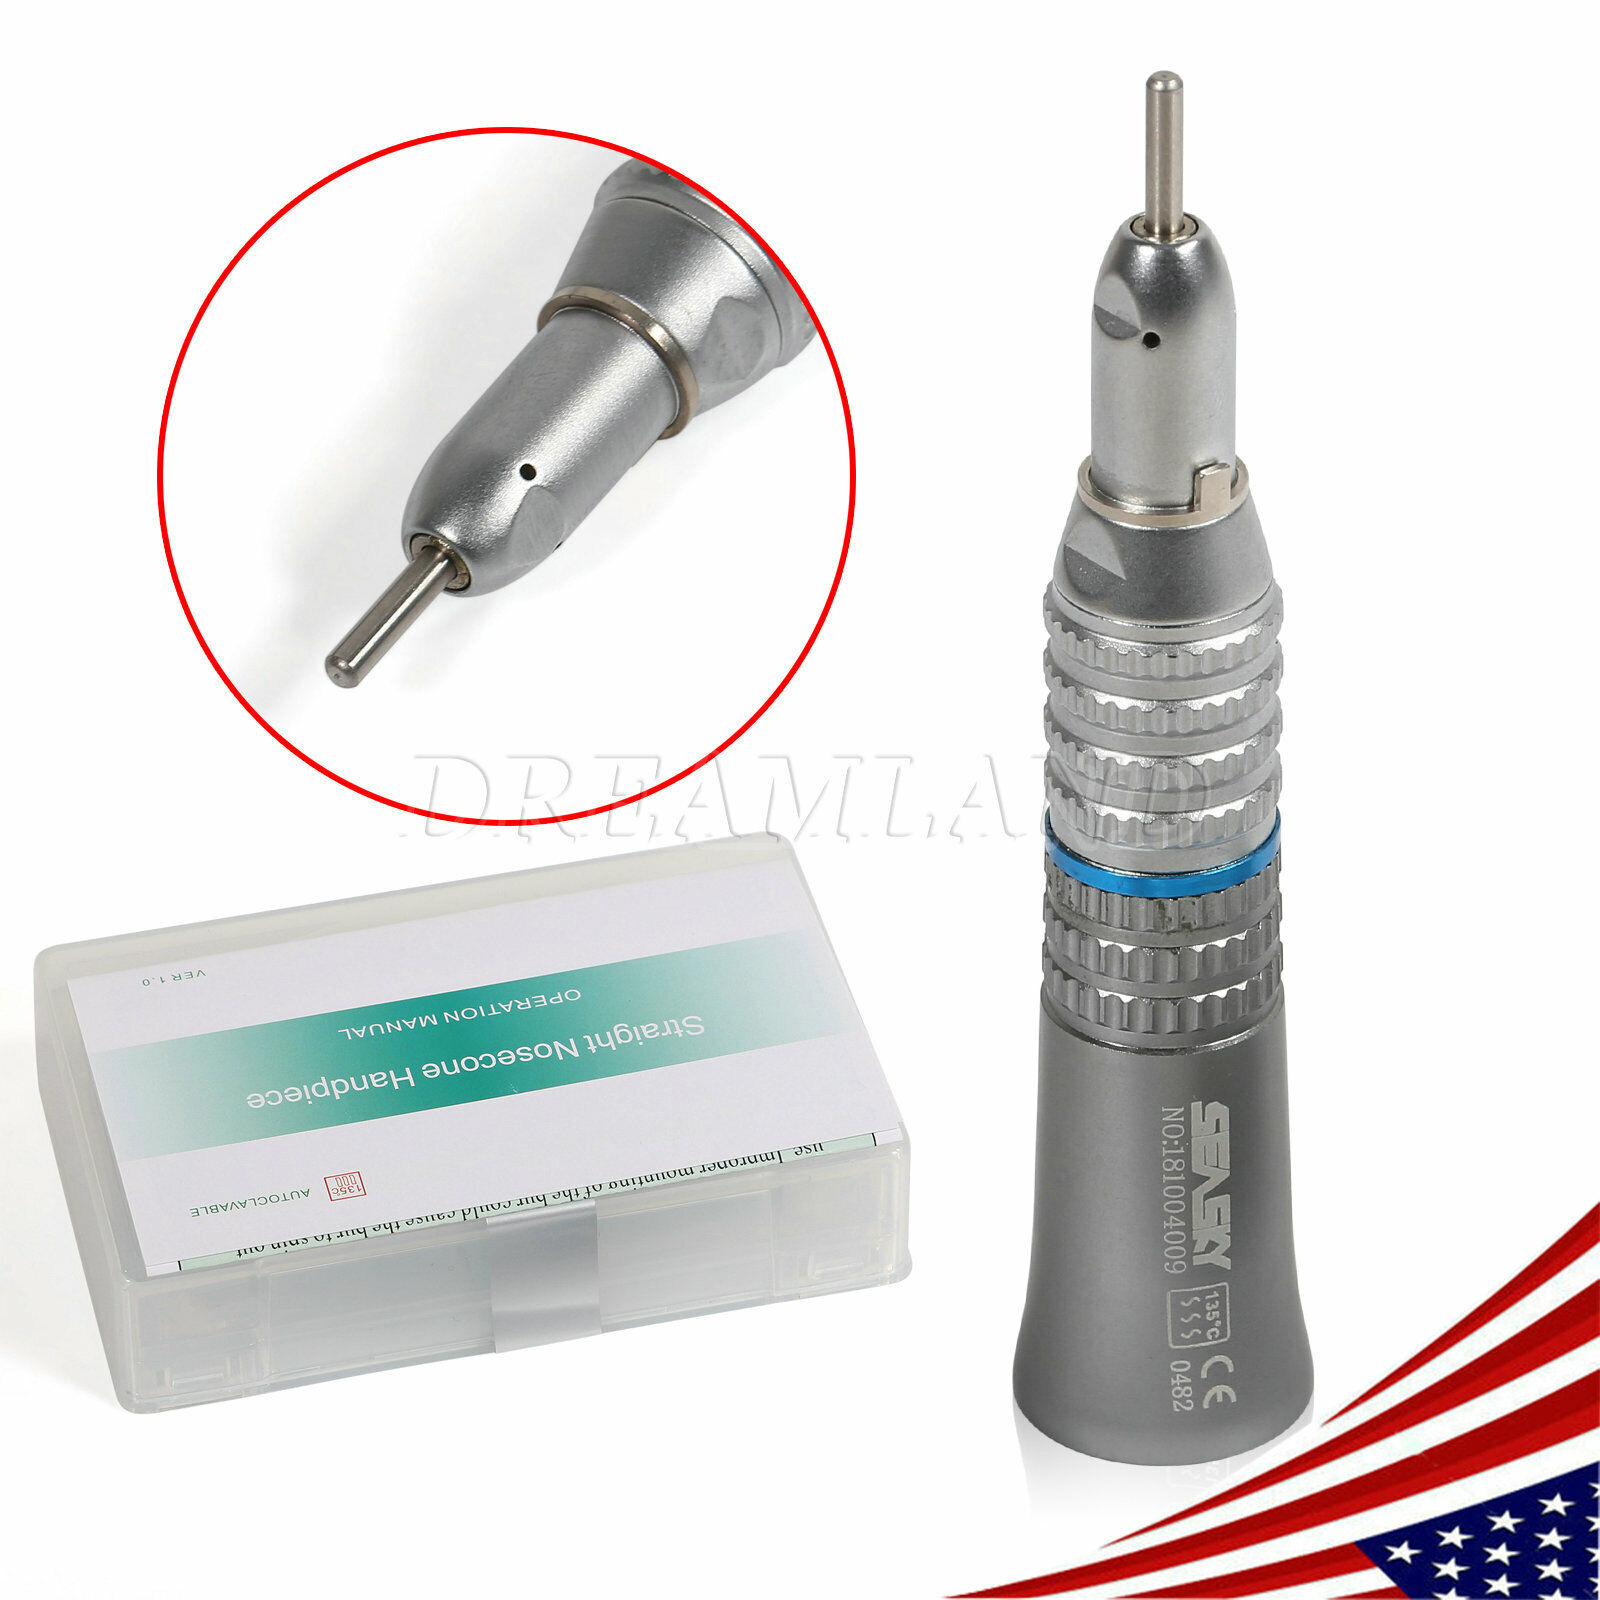 NSK Style Dental Straight Nose cone Handpiece E-type Attach 1:1 Low Speed HP2.35